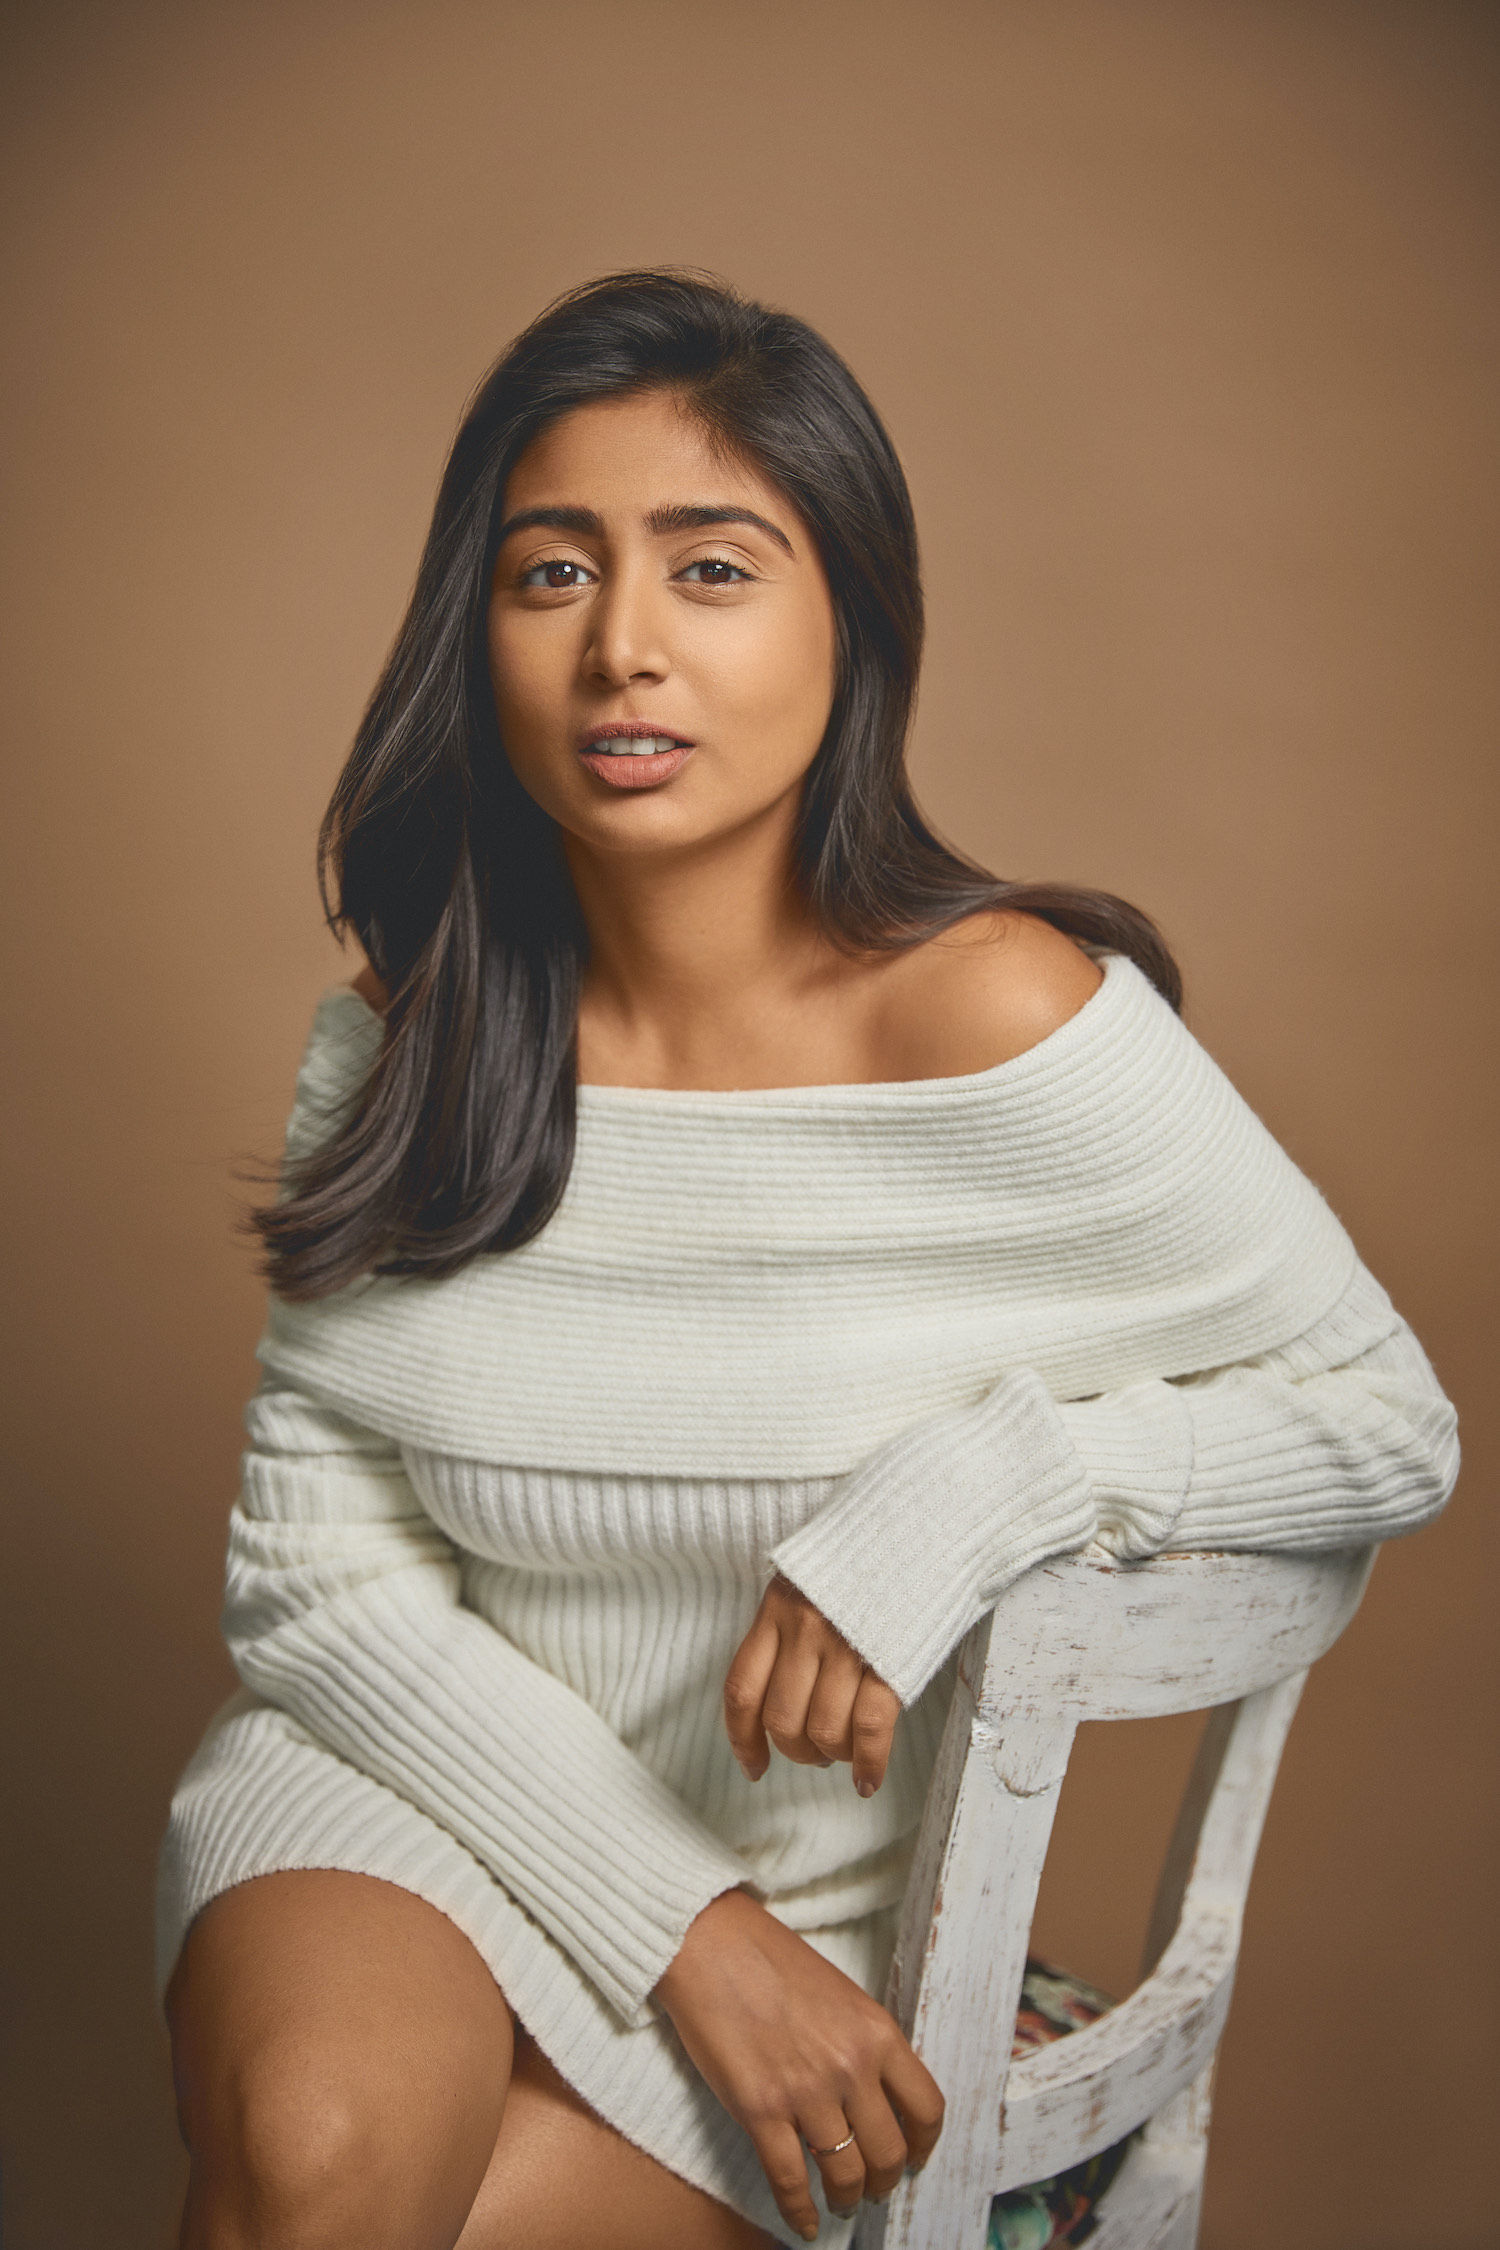 Meagan Concessio on styling Ananya Panday, Gen Z fashion and more.